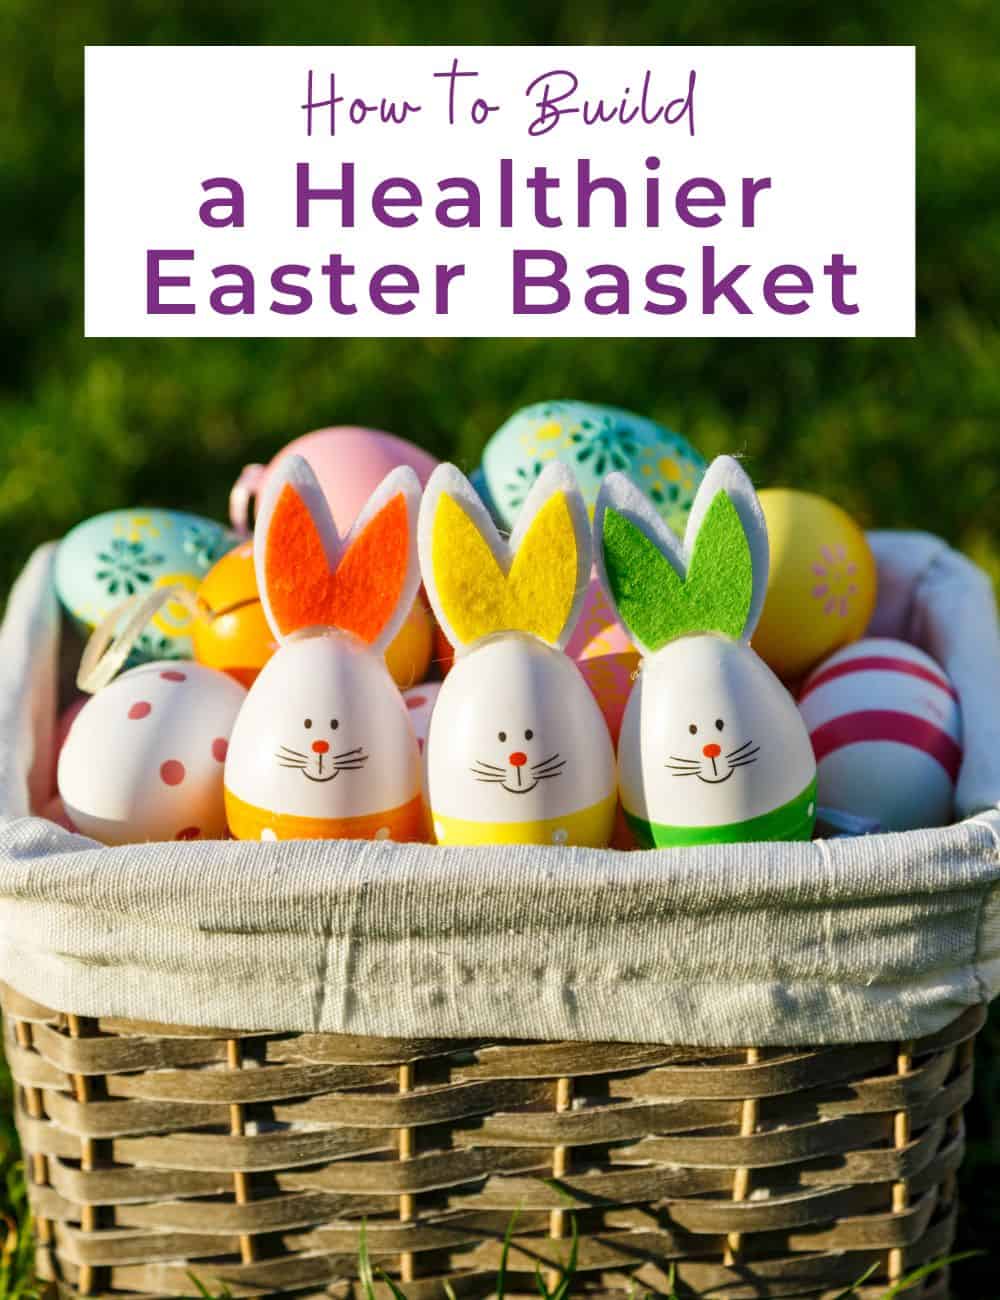 How to Build a Healthier Easter Basket